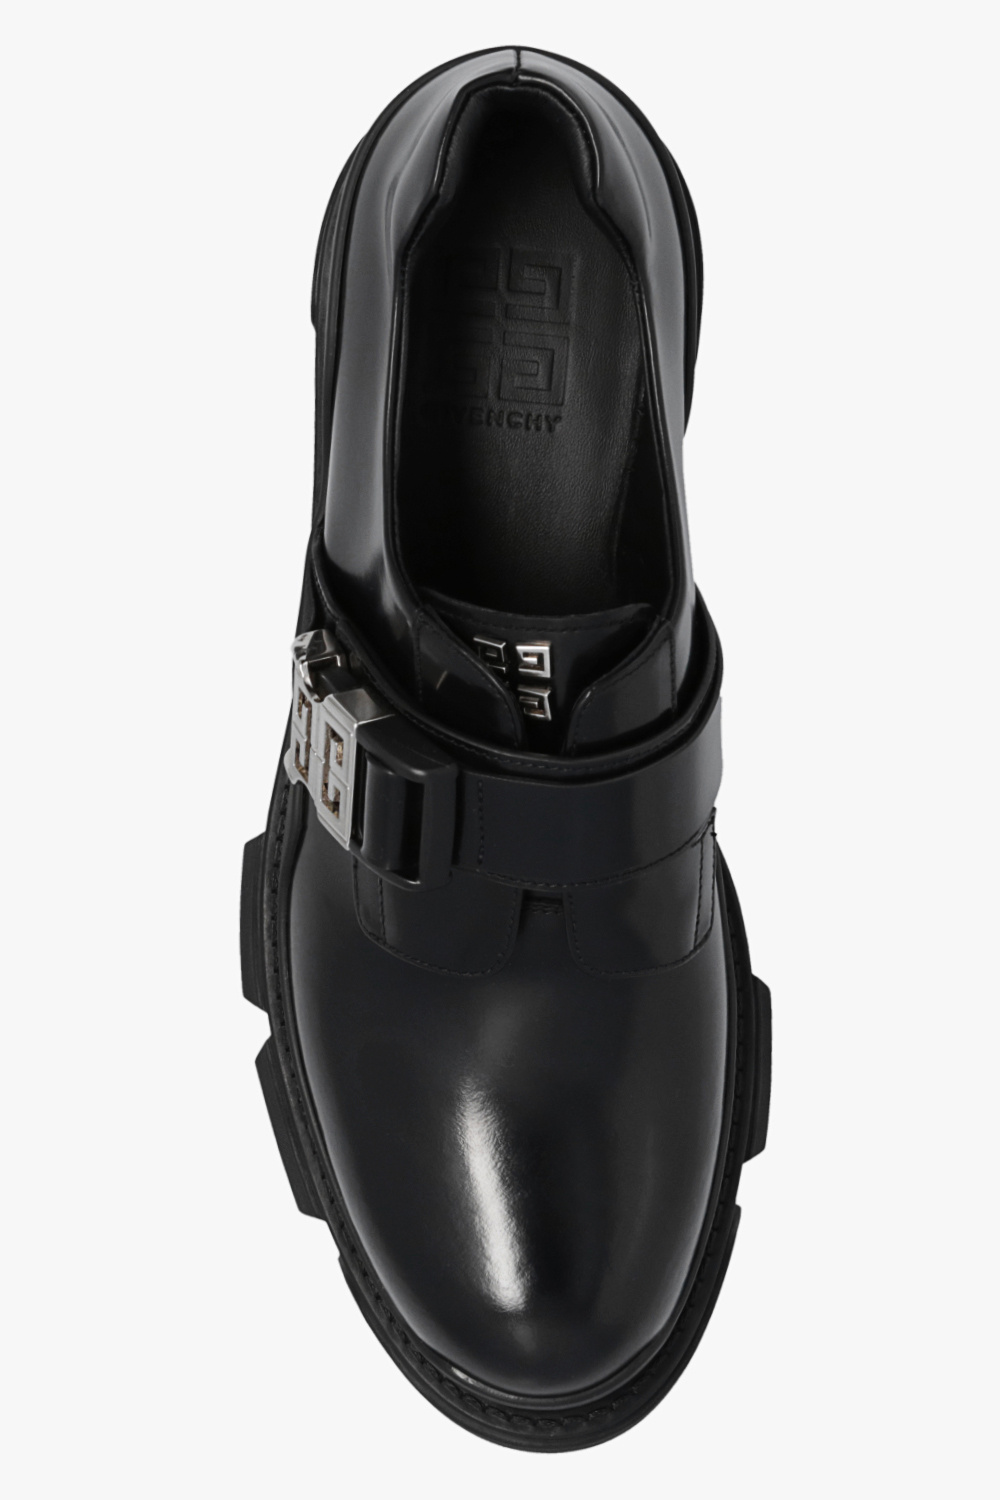 Givenchy ‘Terra’ derby Yung-96 shoes